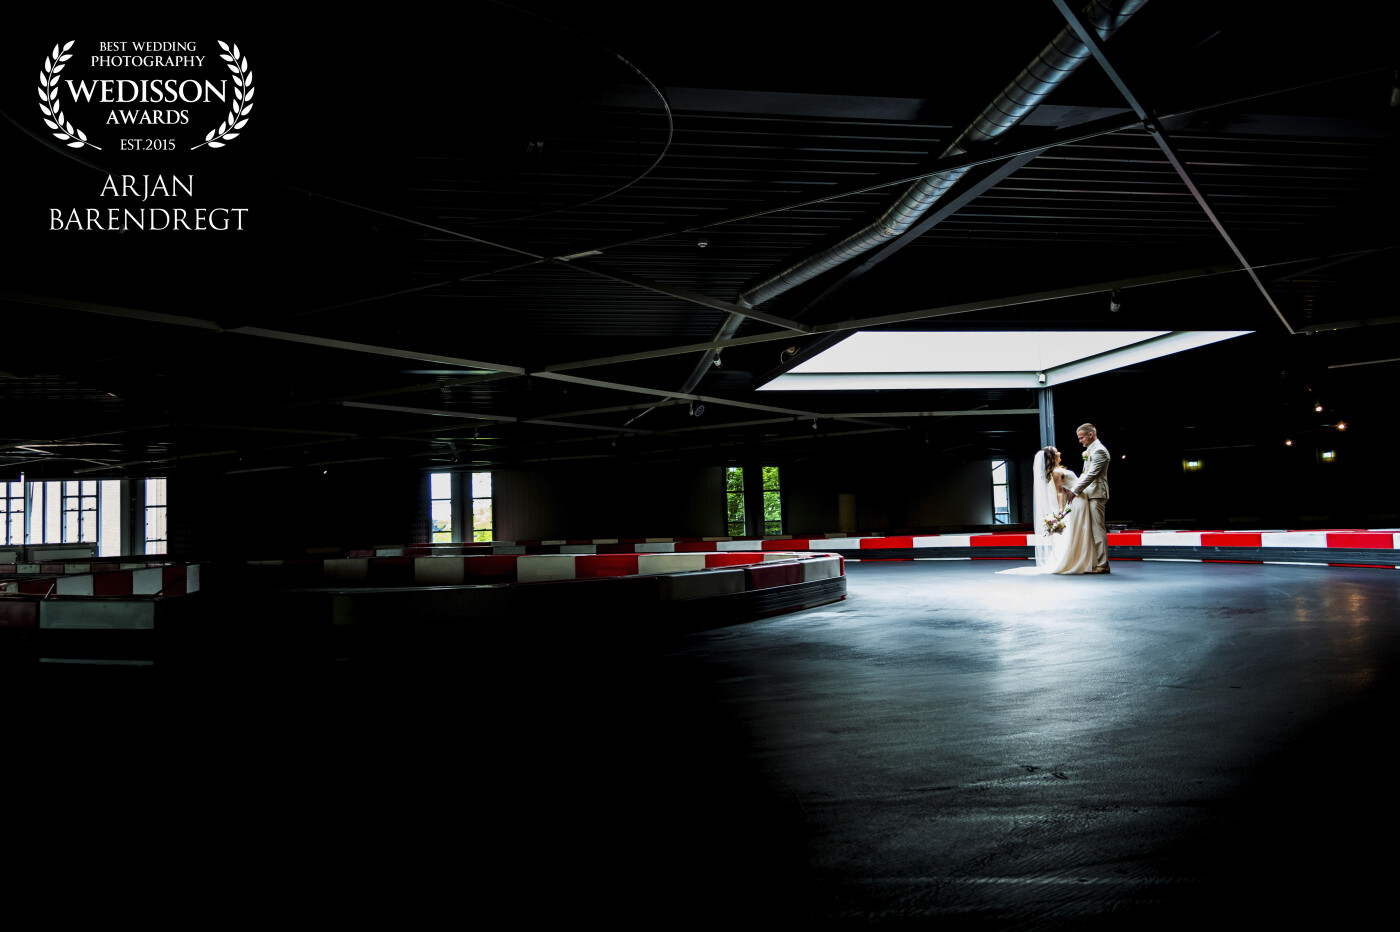 The wedding couple wanted something different during the shoot and took me with them to a kart track <br />
They not only wanted the standard pictures in nature. And I was really surprised of the possibilities this location gave me. <br />
Only a few lamps were burning and so we had to use the only light spot there was in the ceiling. <br />
